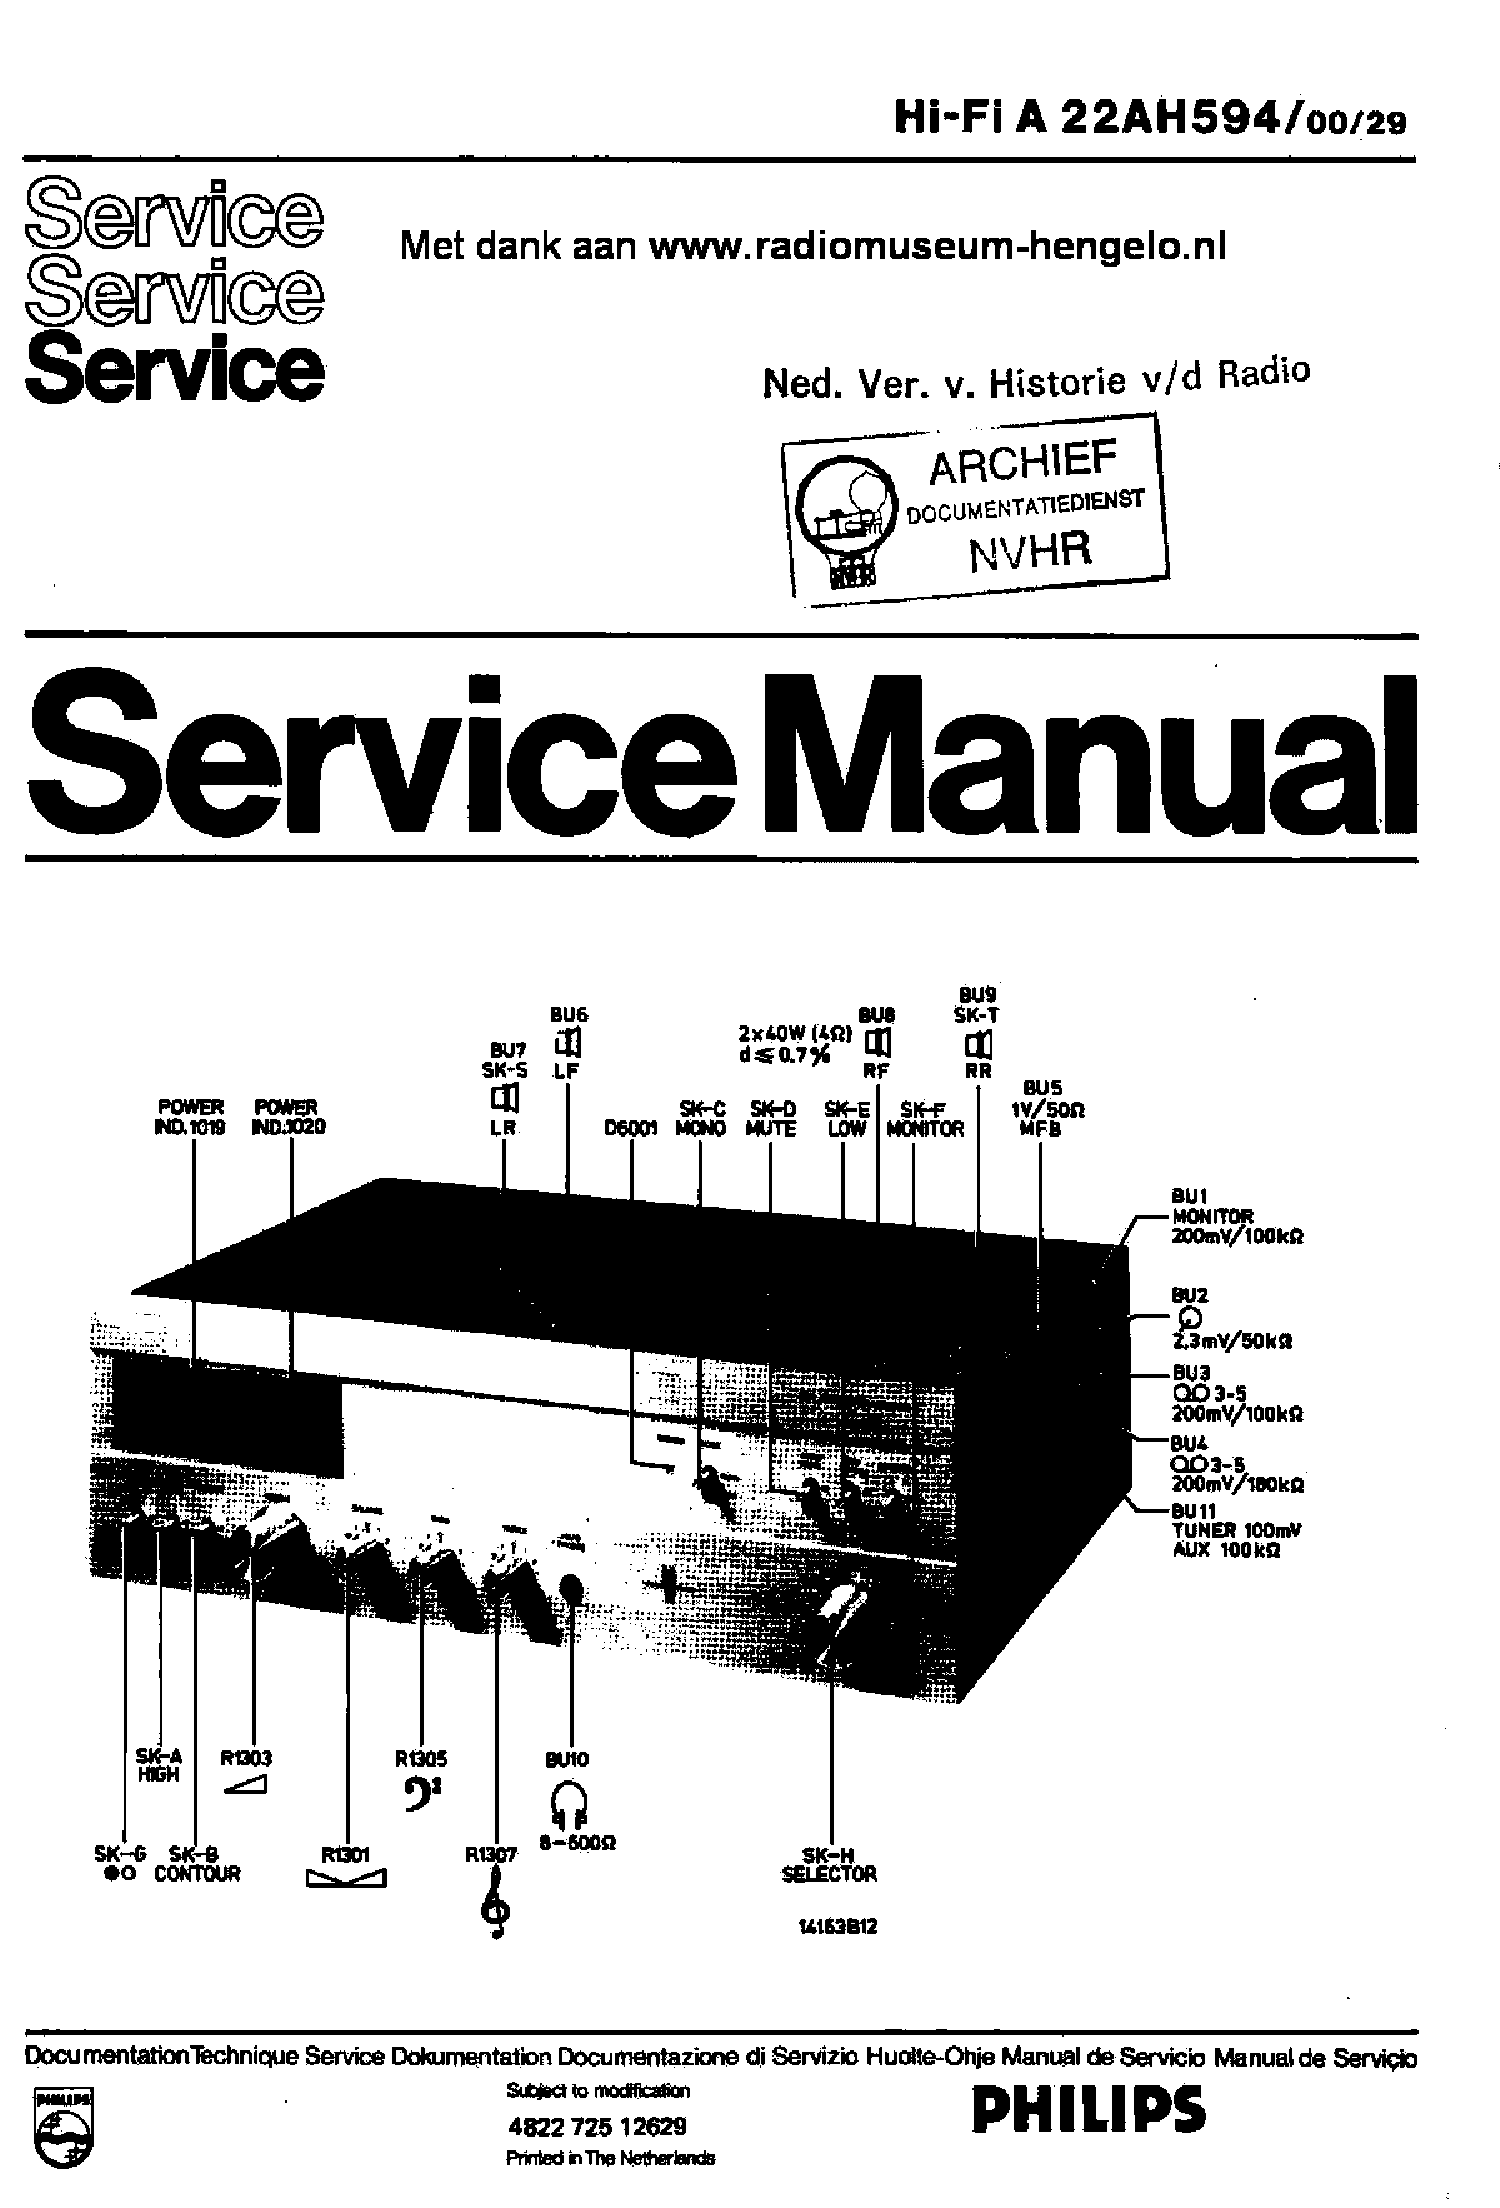 PHILIPS 22AH594-00-29 HIFI AMPLIFIER SM service manual (1st page)